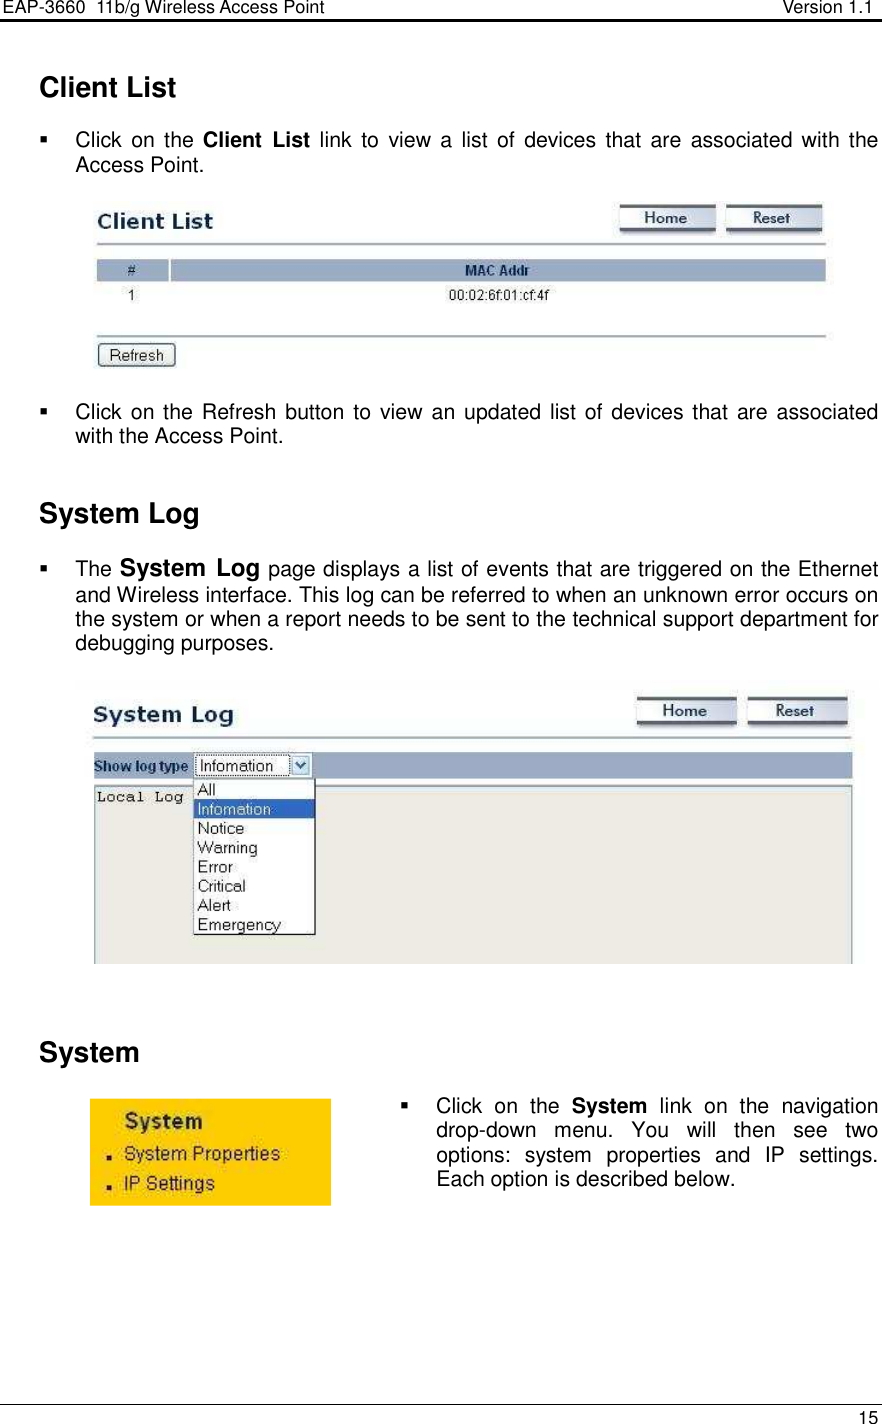 EAP-3660  11b/g Wireless Access Point                                                           Version 1.1    15     Client List   Click  on the Client  List link  to  view  a  list  of  devices that  are  associated  with  the Access Point.      Click on the Refresh button to view an updated list of  devices that are associated with the Access Point.     System Log   The System Log page displays a list of events that are triggered on the Ethernet and Wireless interface. This log can be referred to when an unknown error occurs on the system or when a report needs to be sent to the technical support department for debugging purposes.        System    Click  on  the  System  link  on  the  navigation drop-down  menu.  You  will  then  see  two options:  system  properties  and  IP  settings. Each option is described below.         